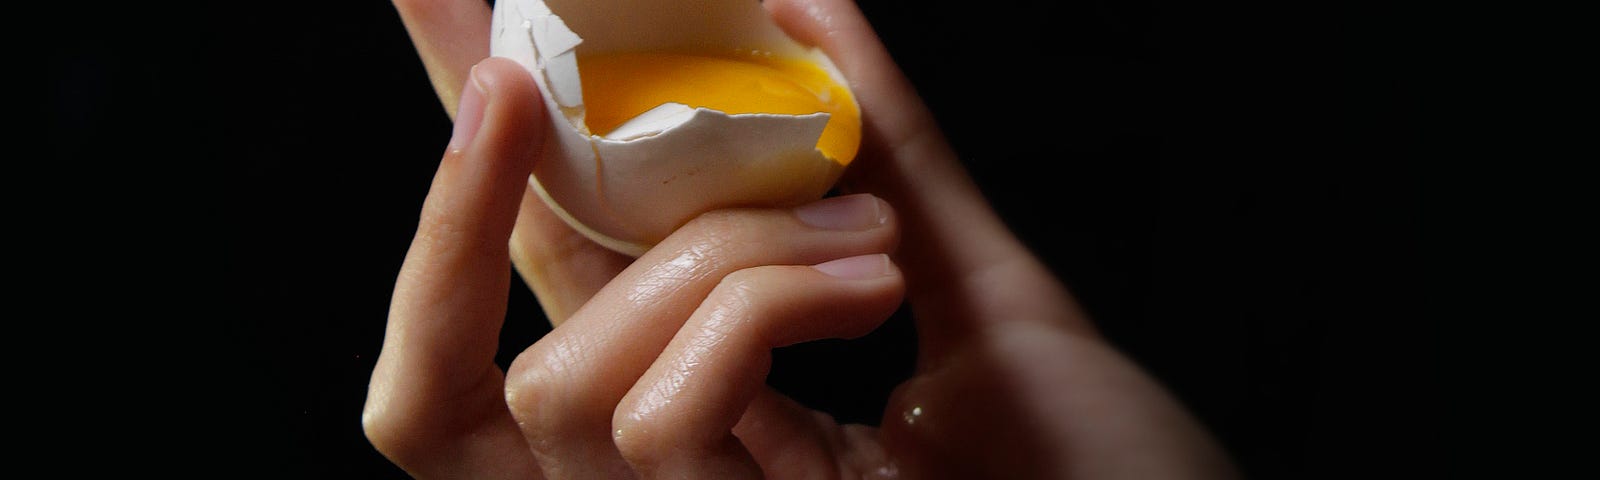 A shattered egg drips yolk into a hand holding the shell.